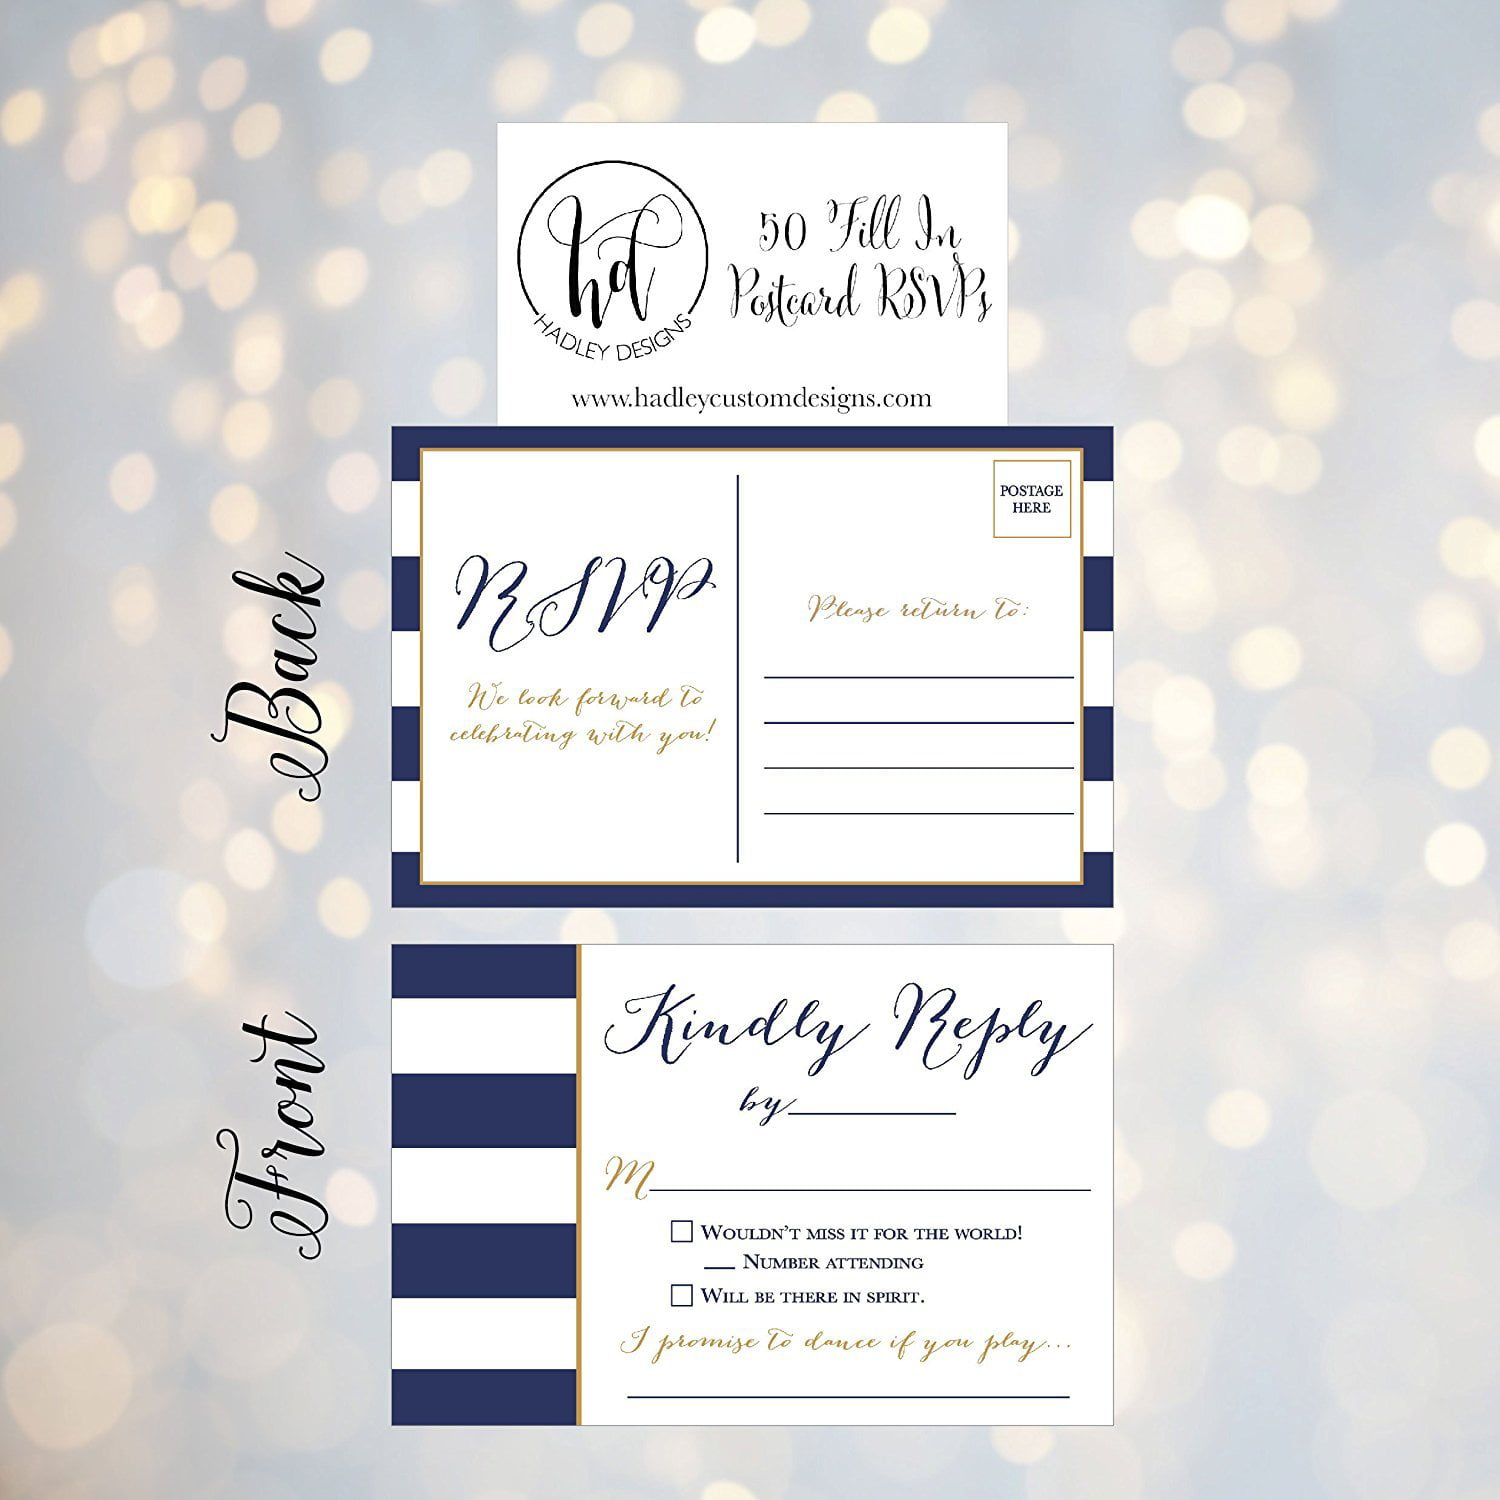 RSVP Postcards engagement PRINTED Announcement cards personalized wedding RSVP Bridal shower